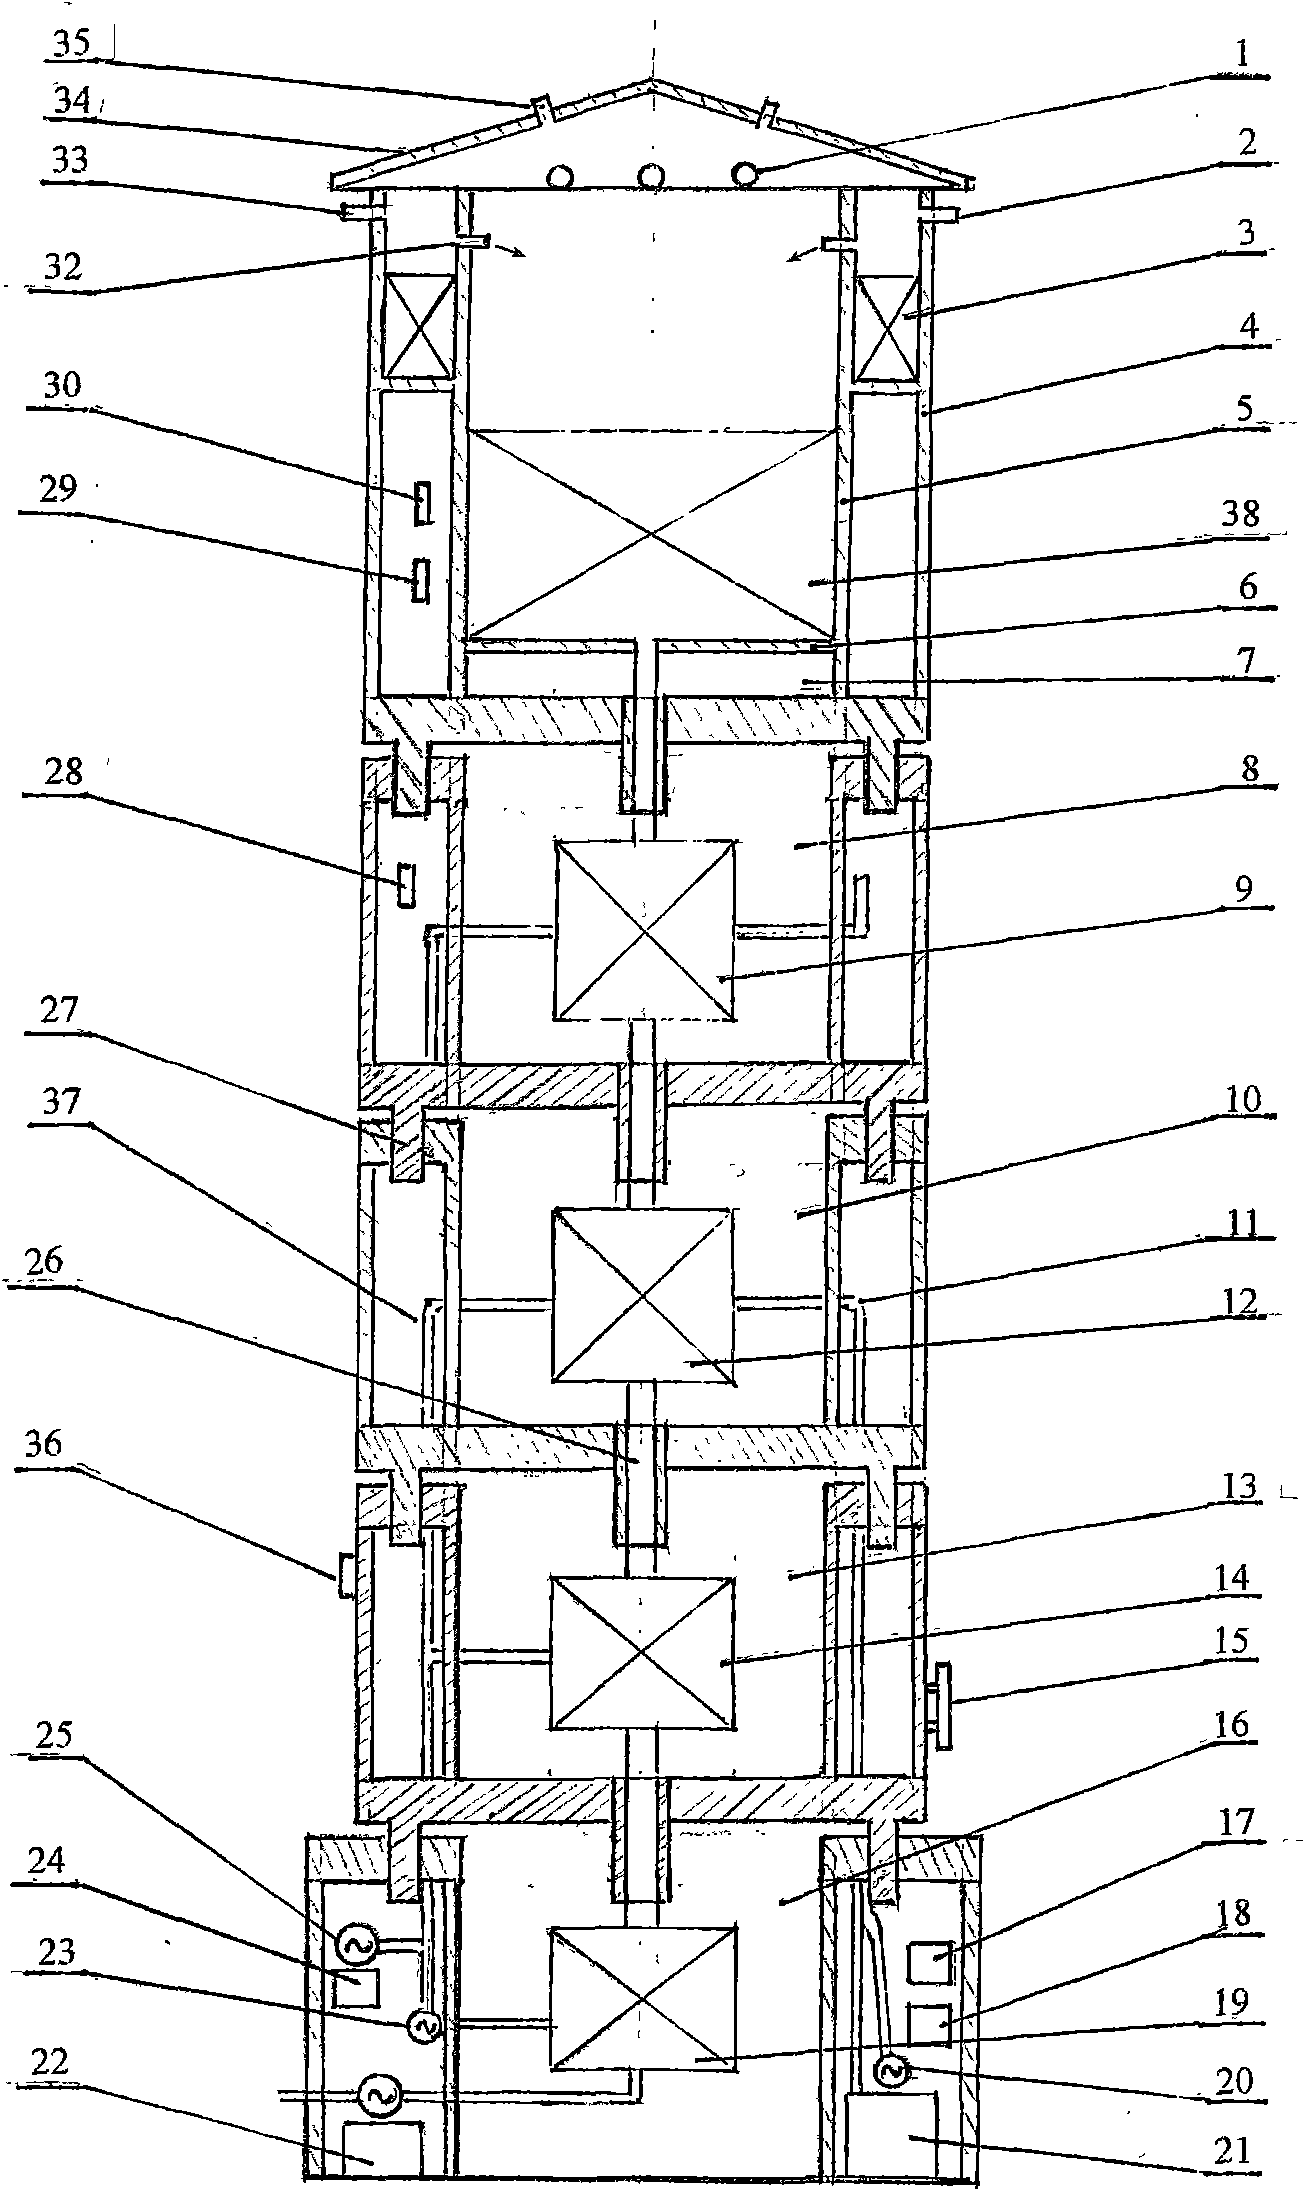 Method for filtering various water sources into drinking water